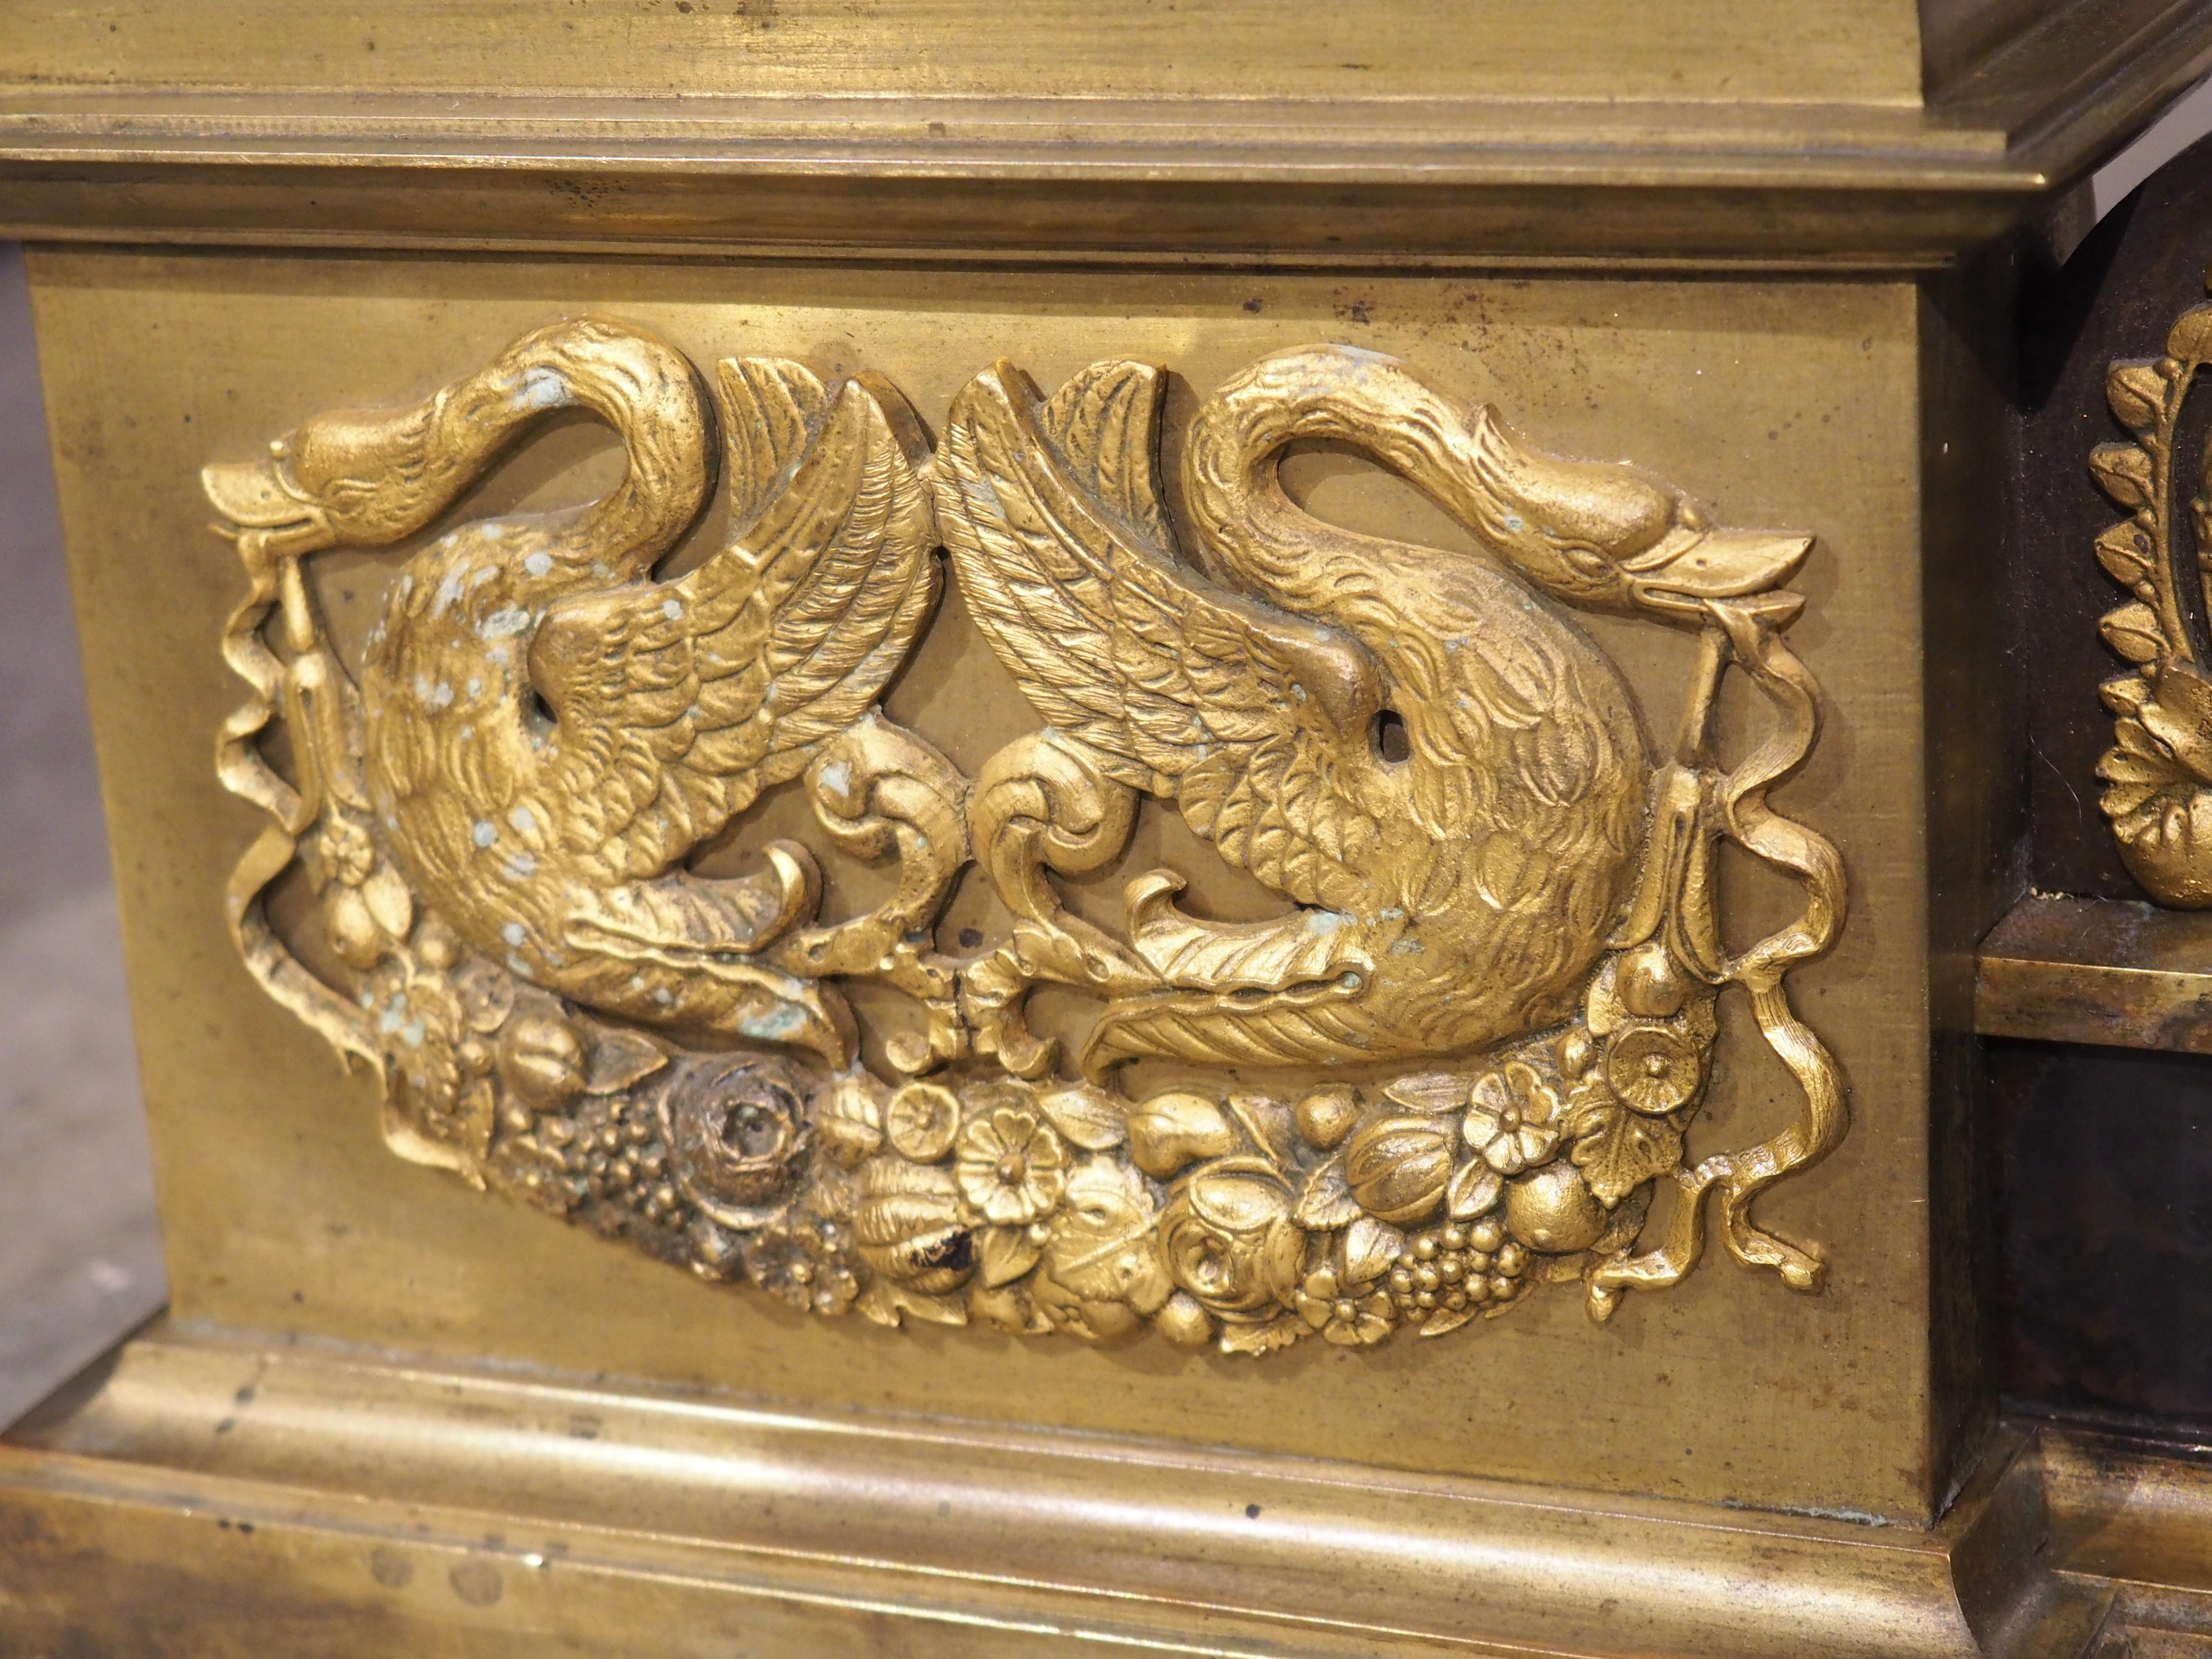 Period French Empire Patinated and Gilt Bronze Fireplace Fender, Circa 1815 For Sale 8